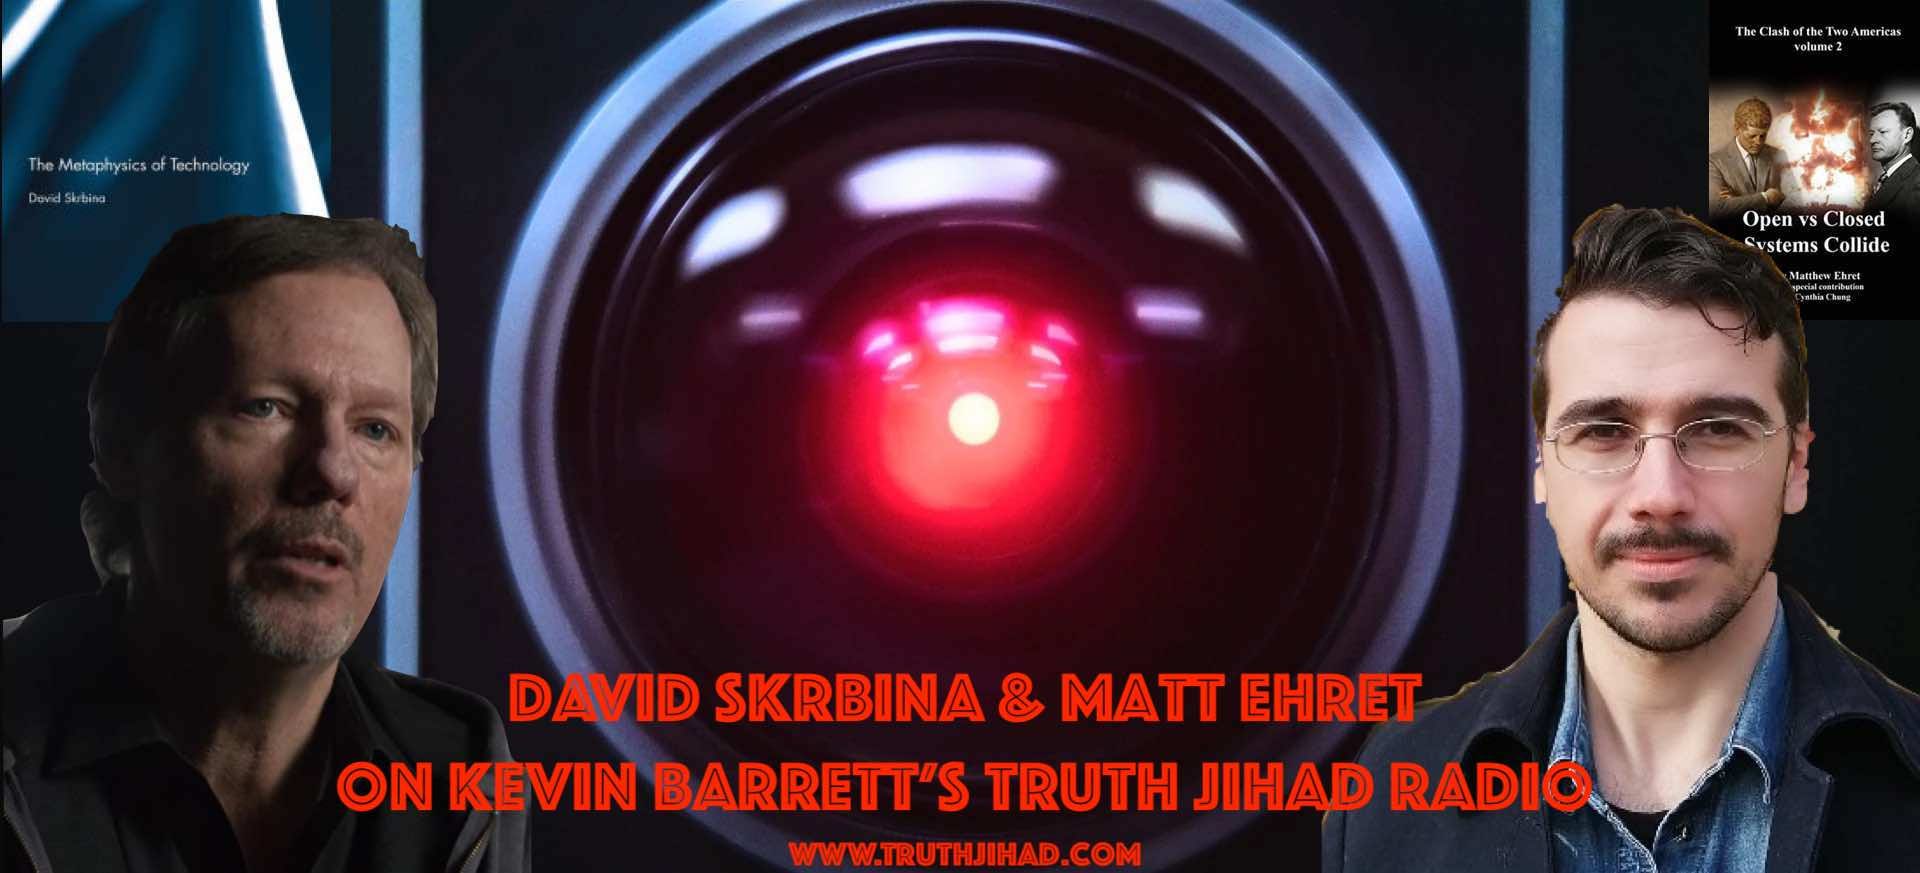 Matt Ehret Counters David Skrbina on “Artificial Idiocy,” Lovesick Chatbot Stalkers, and the Metaphysics of Technology